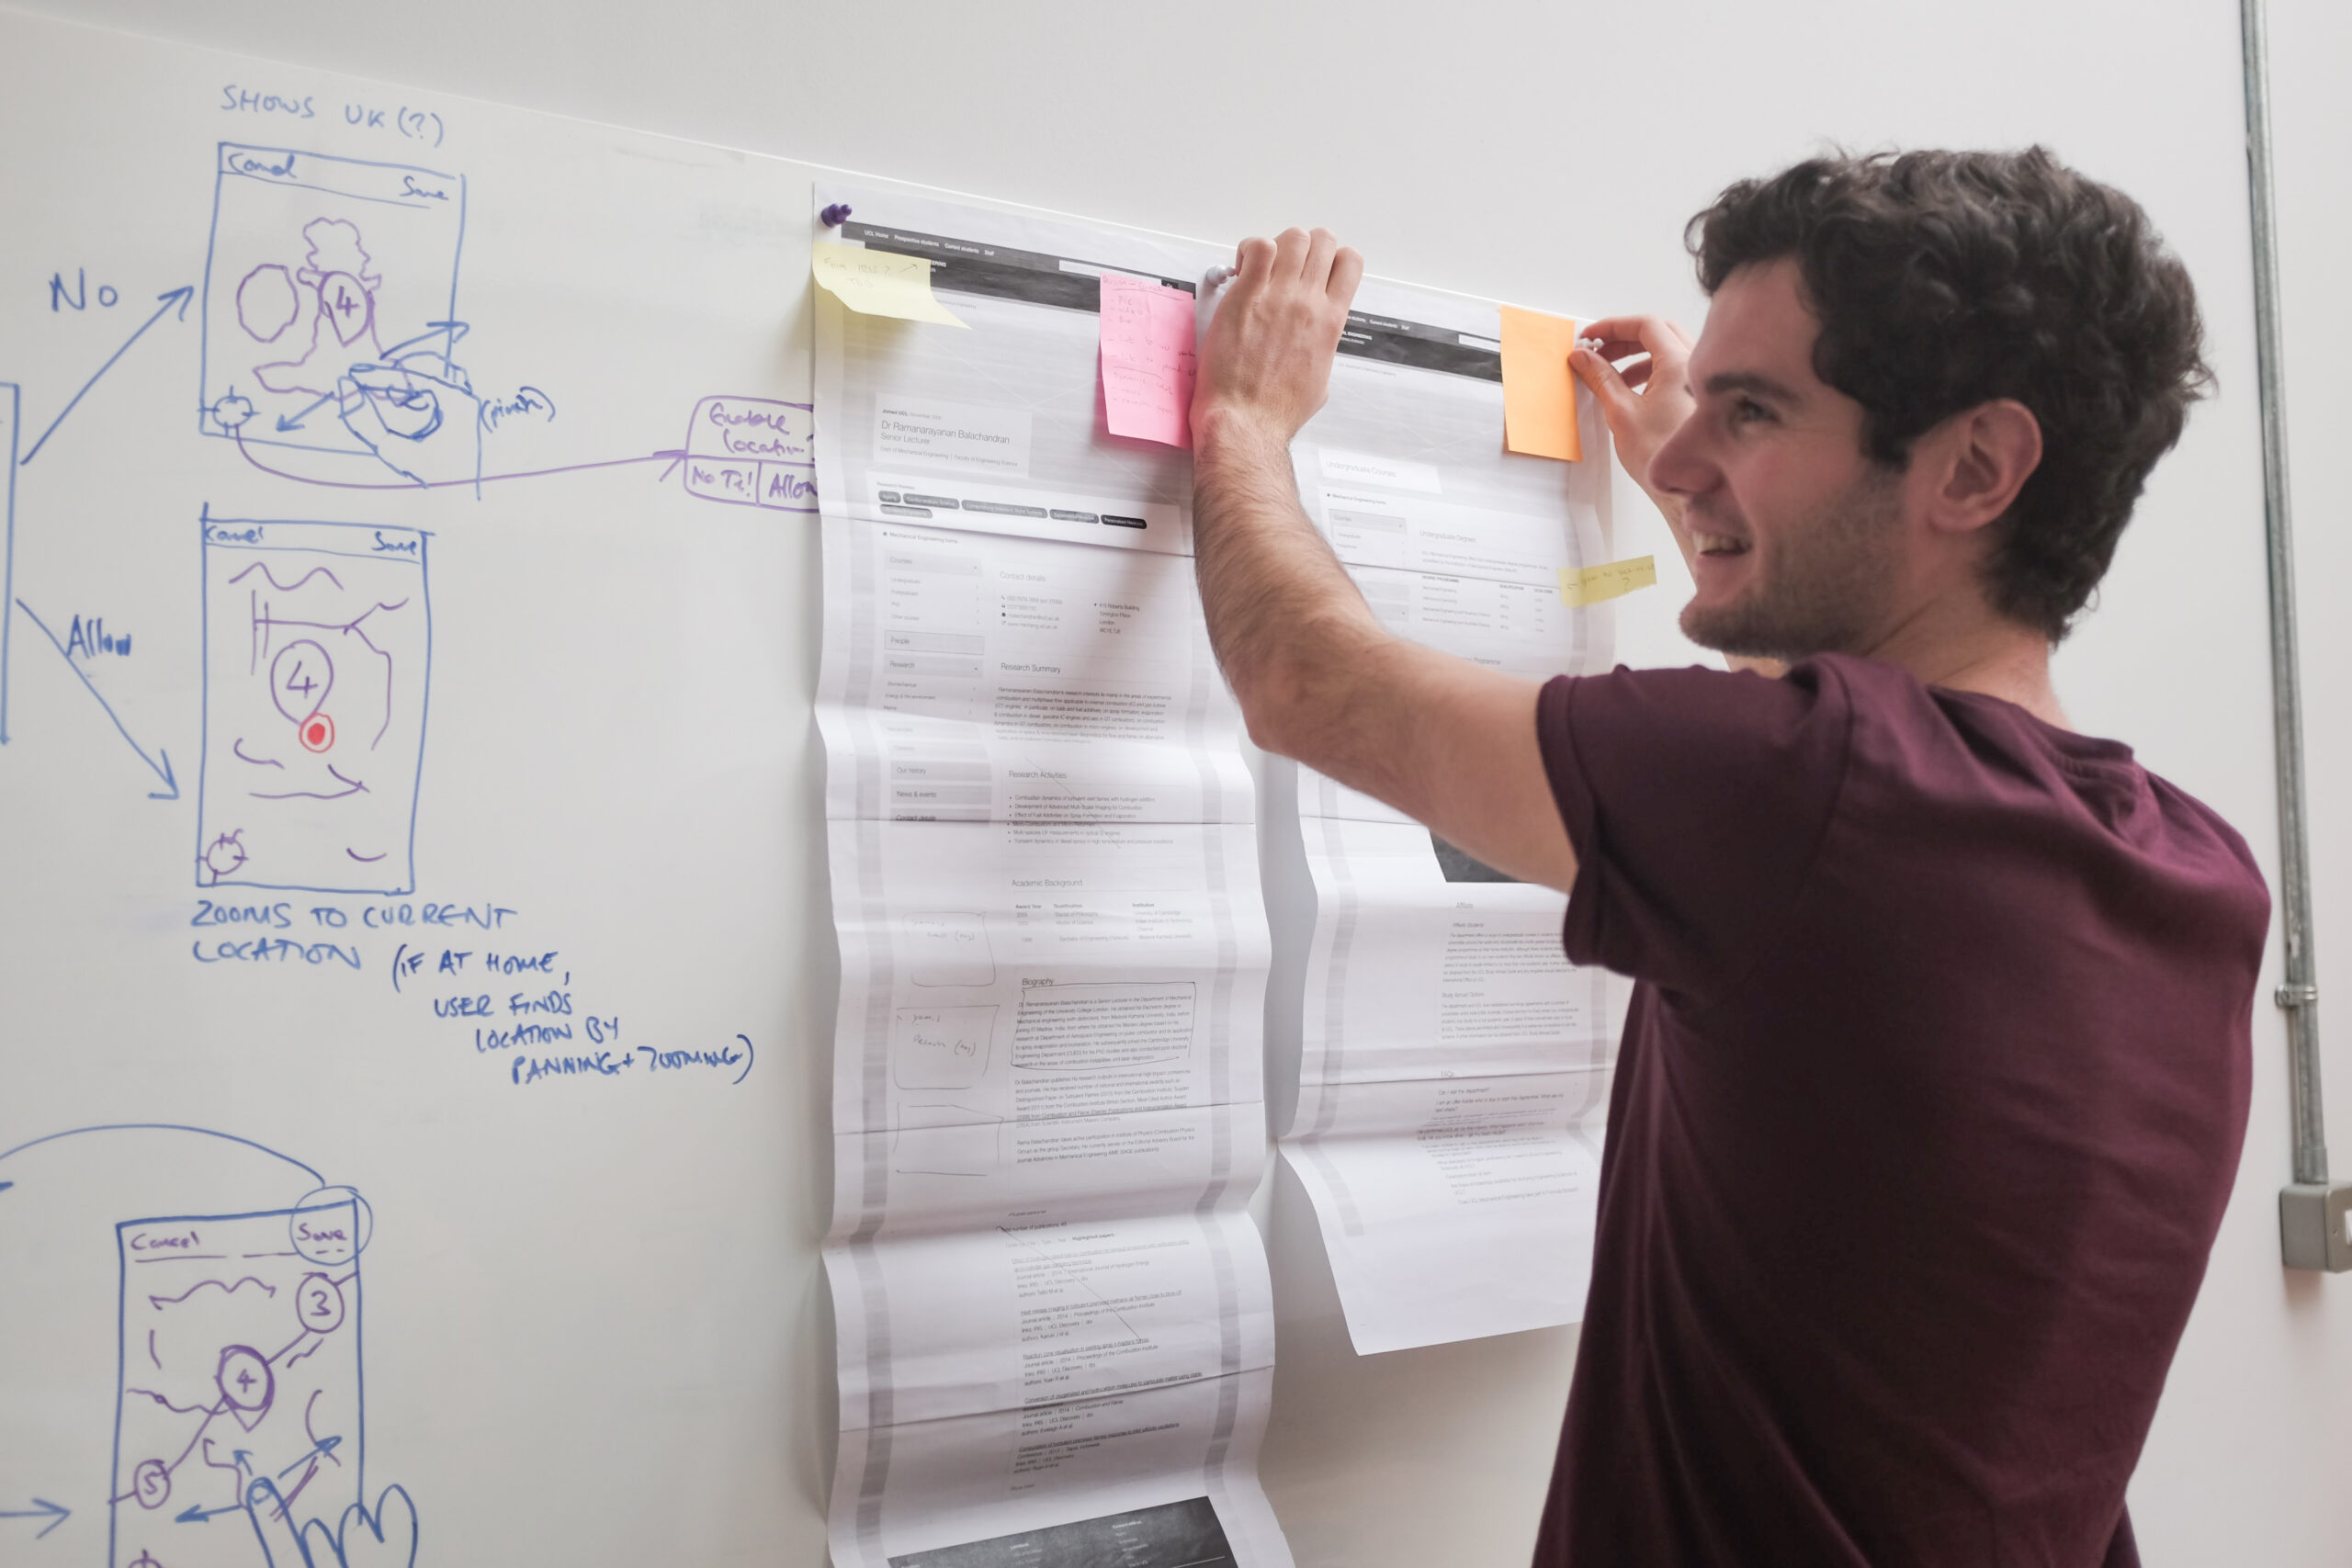 A person taking part in a user research process